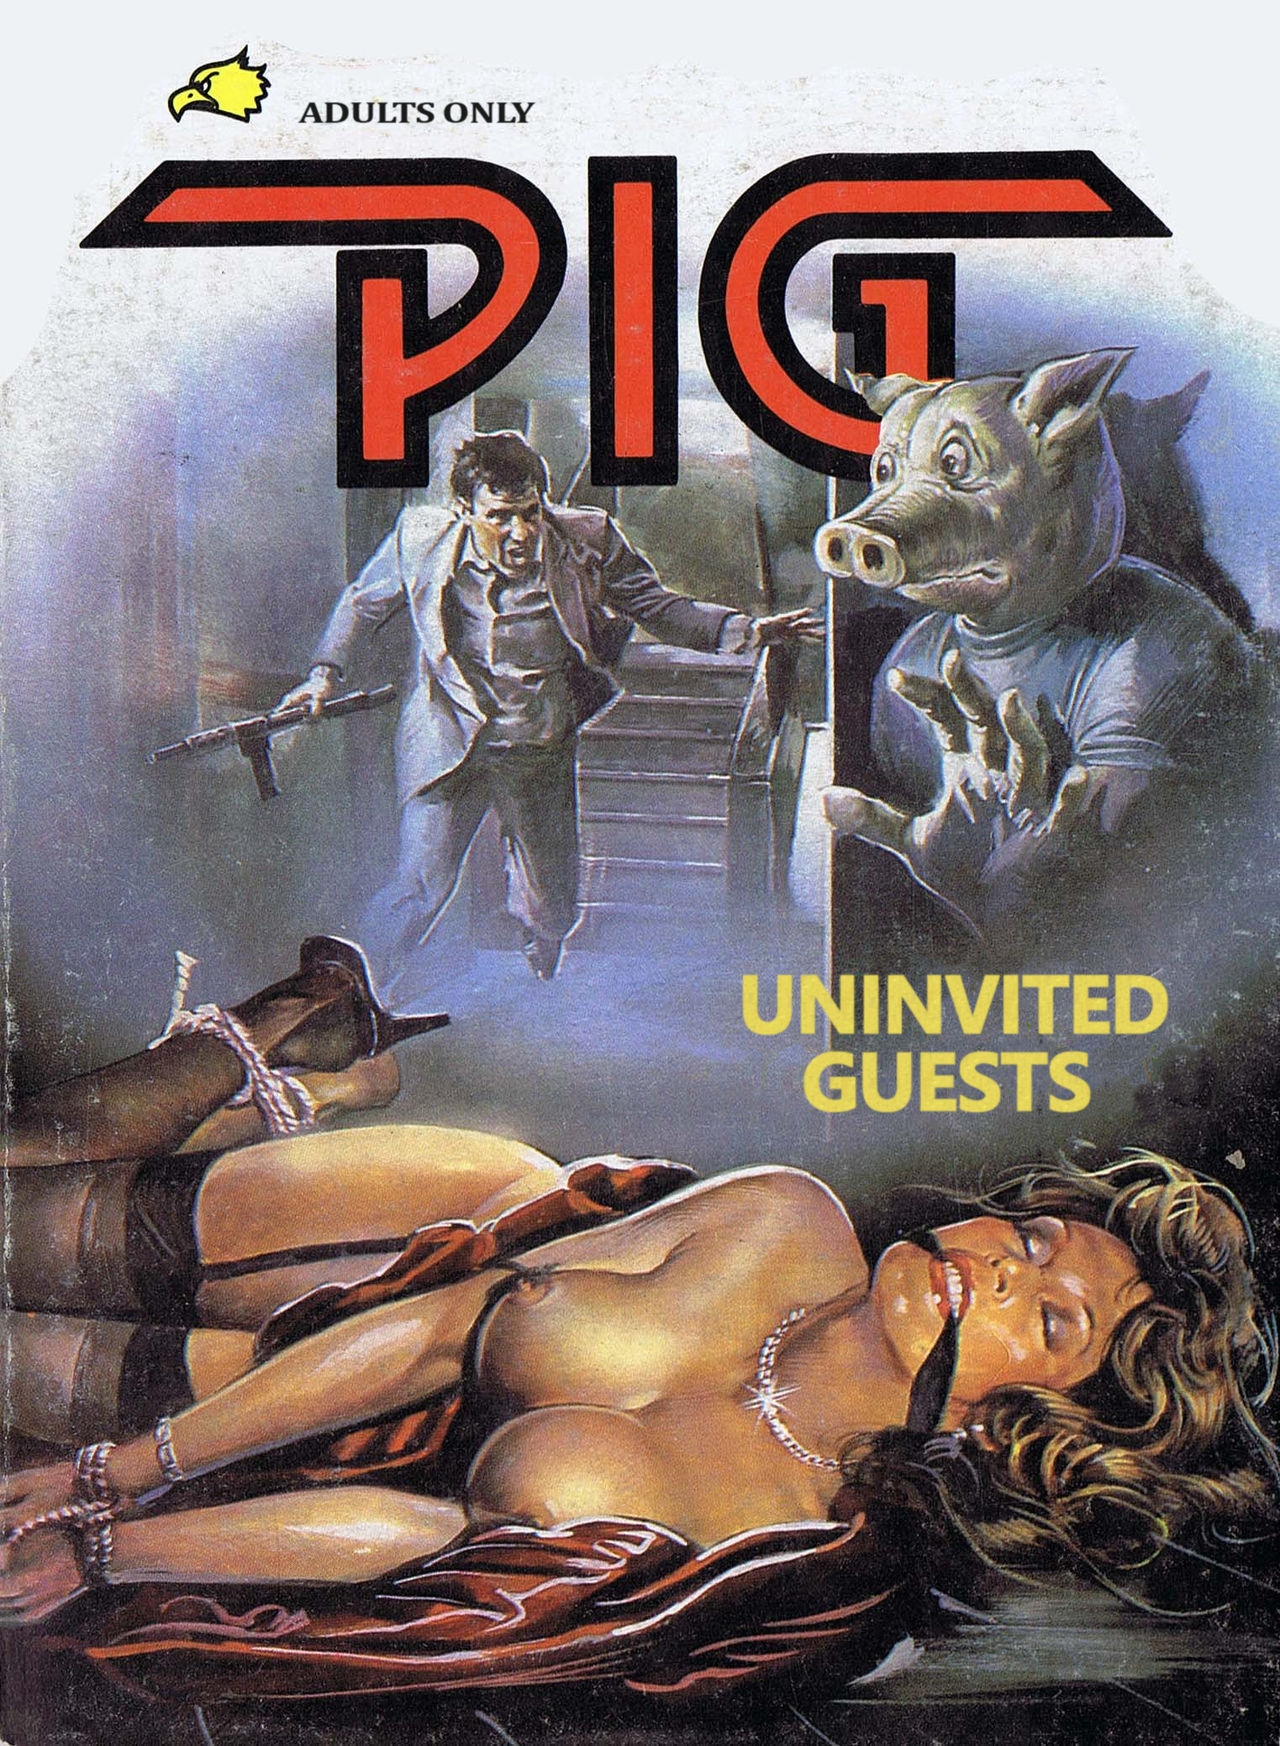 PIG #23  "UNINVITED GUESTS" - ENGLISH 0